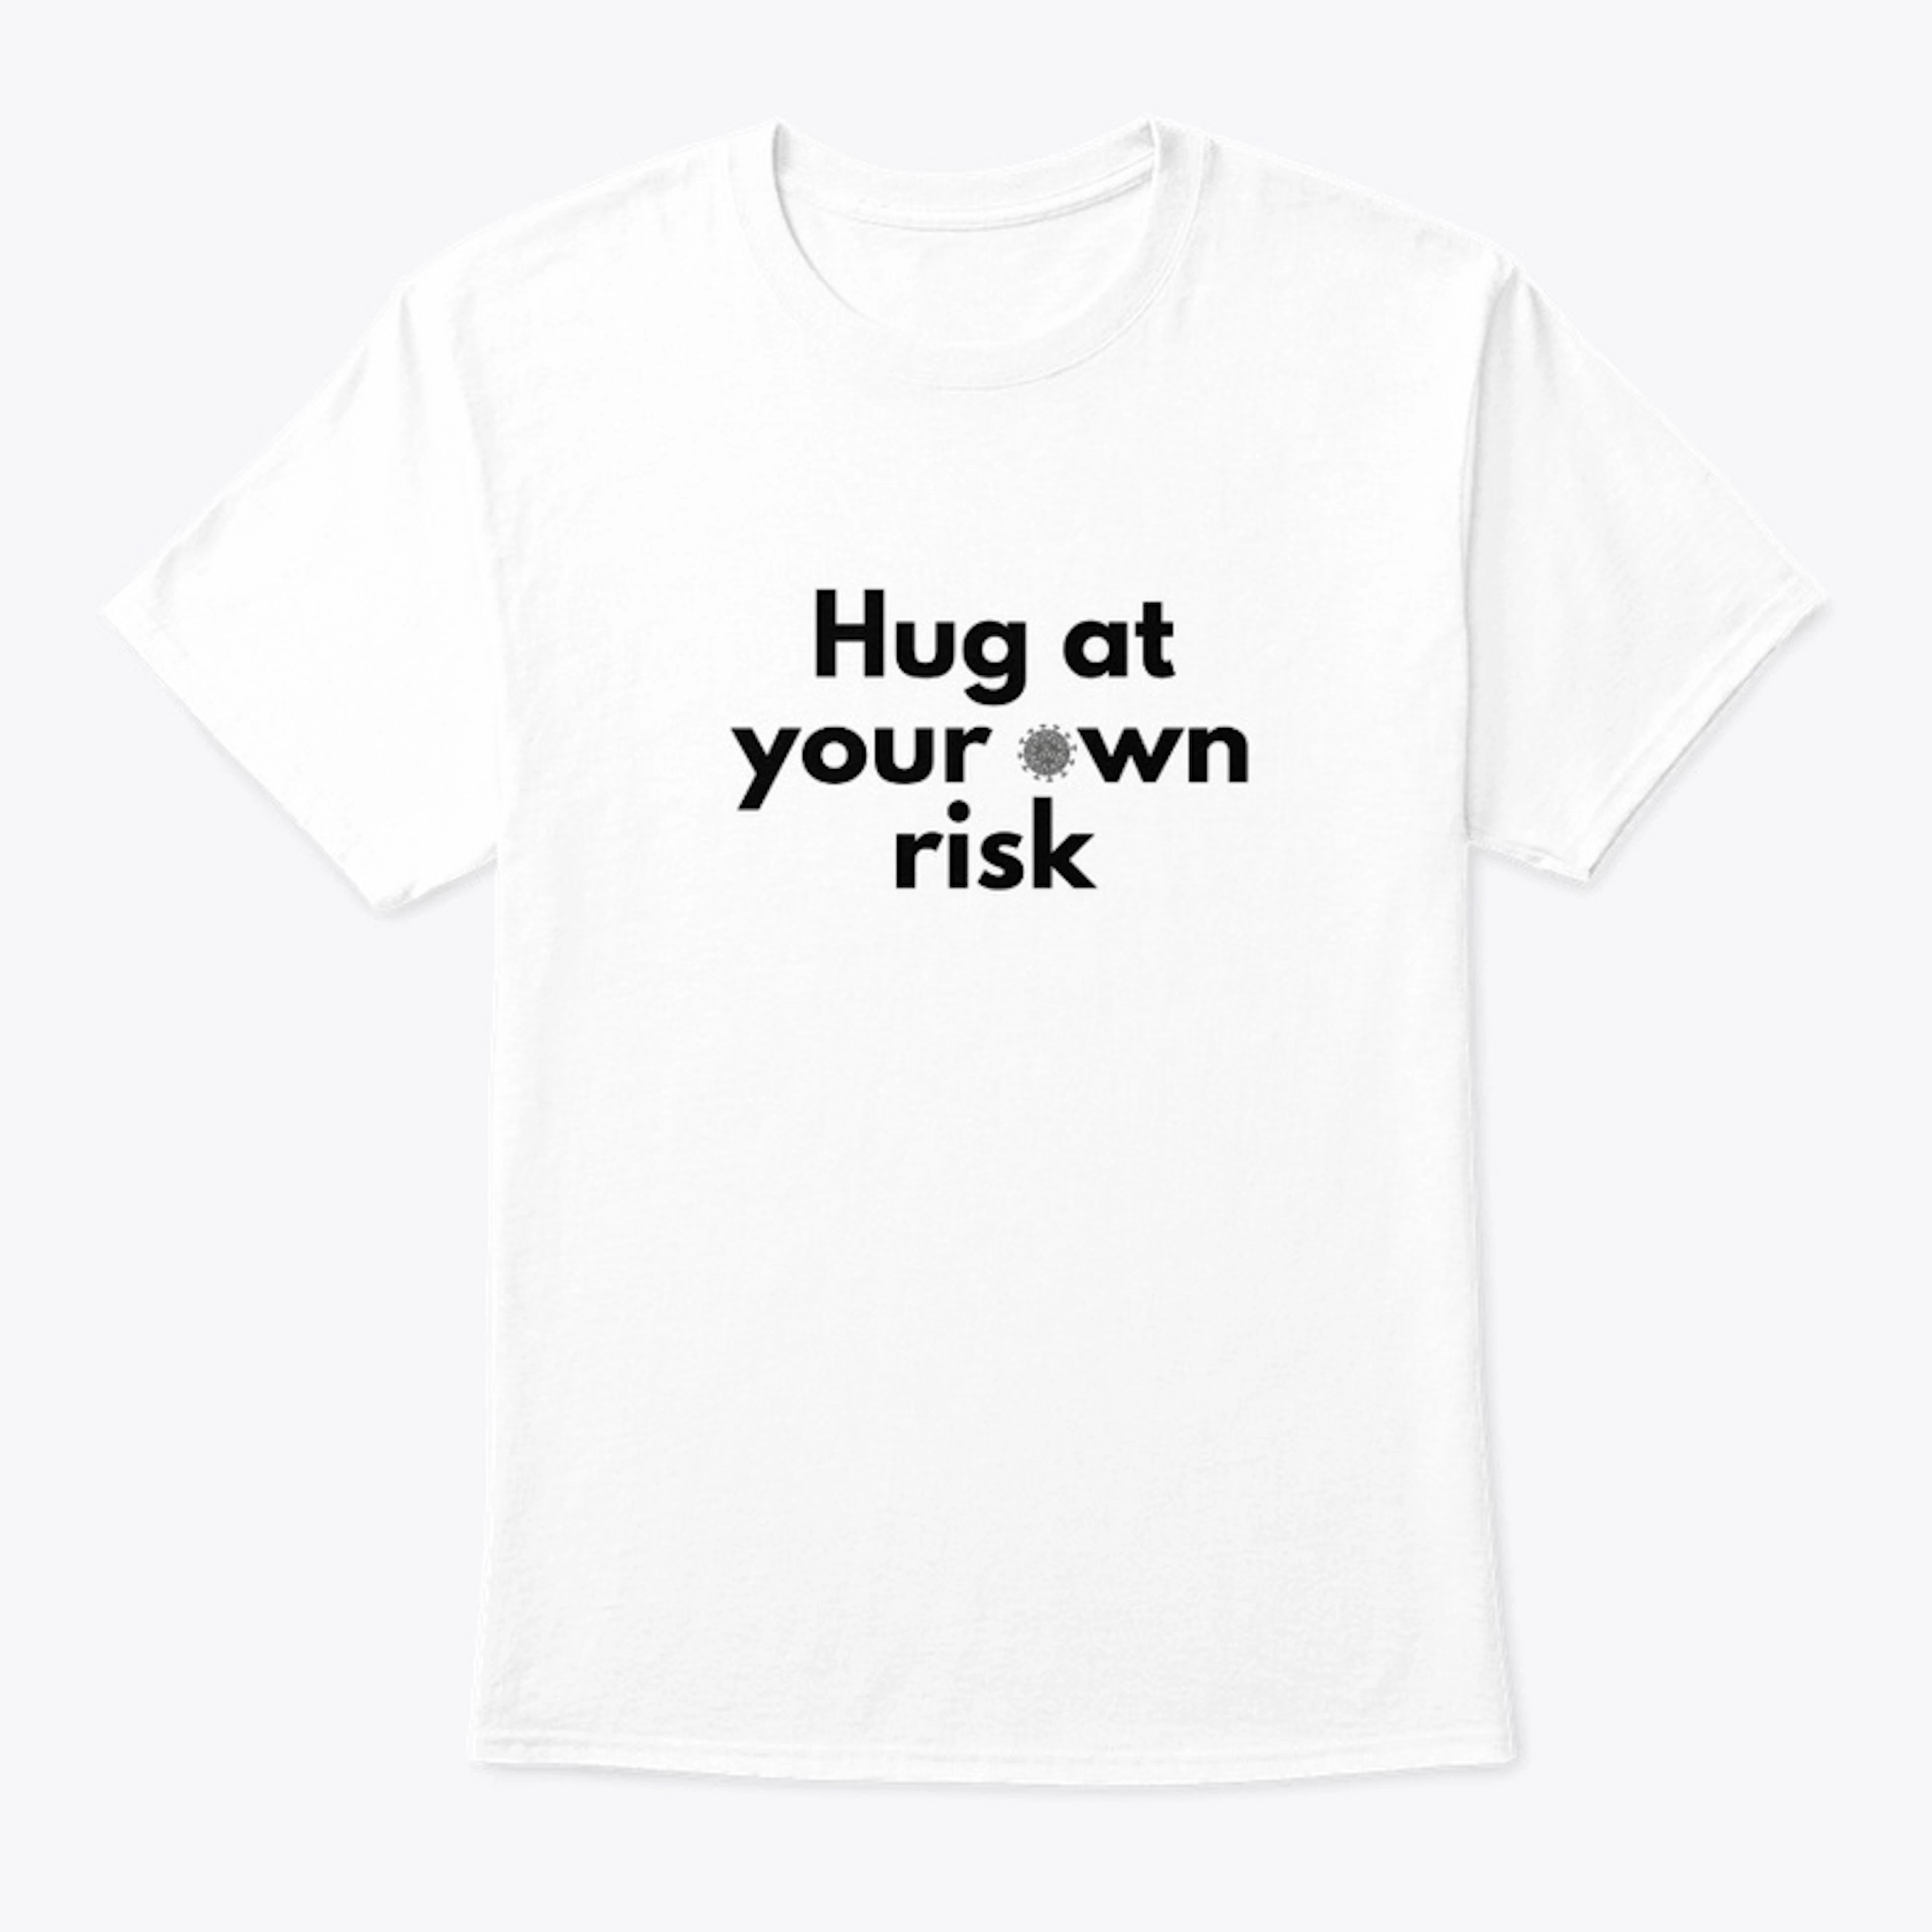 Hug at your own risk